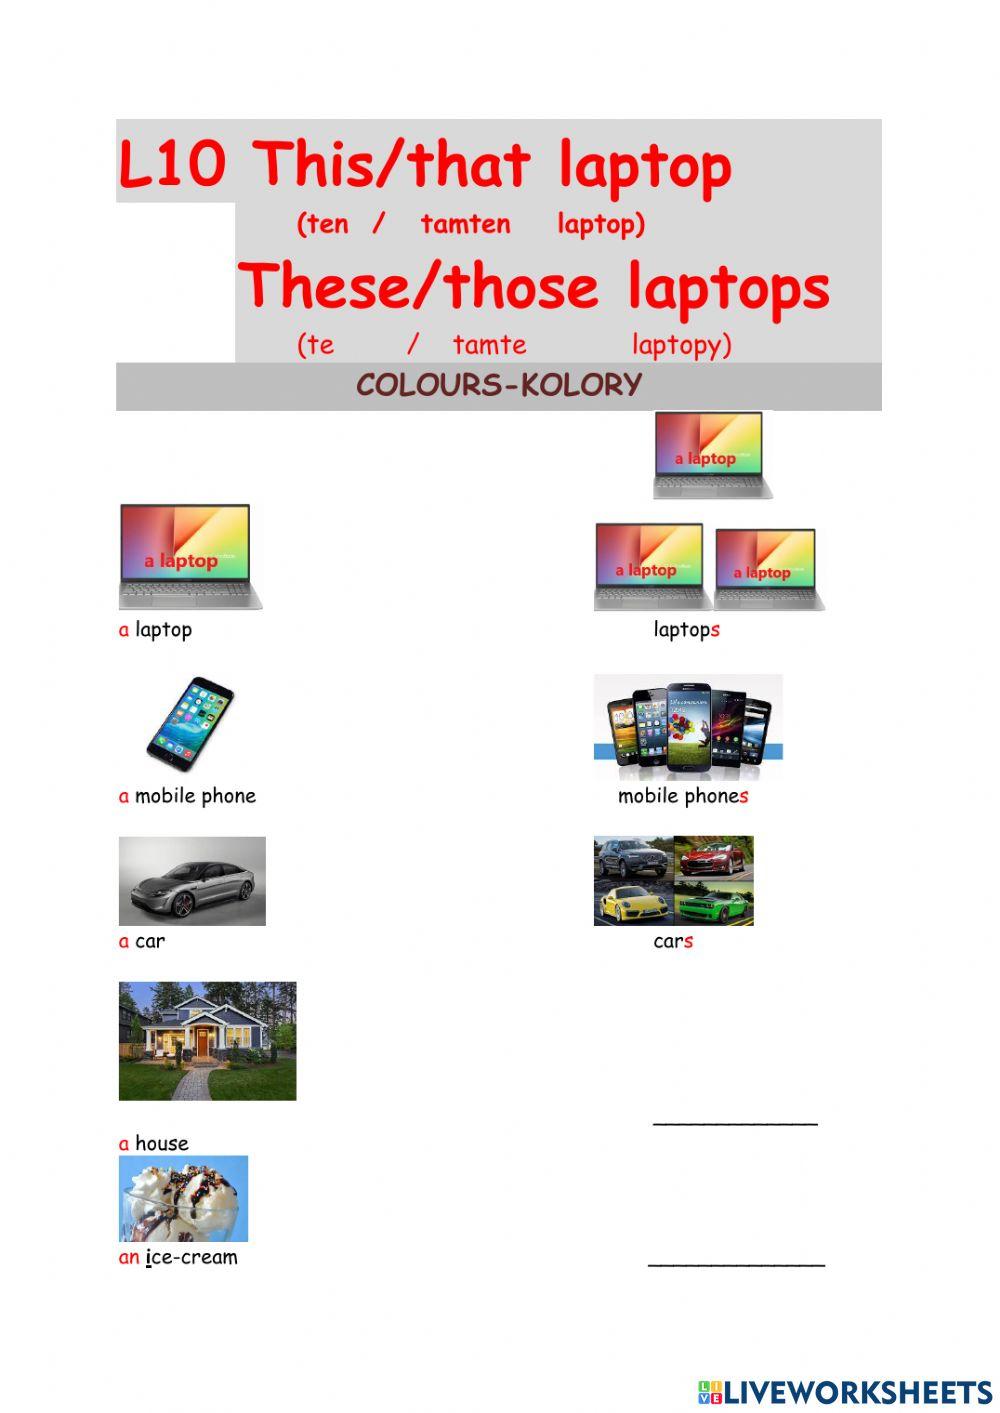 L014These laptops